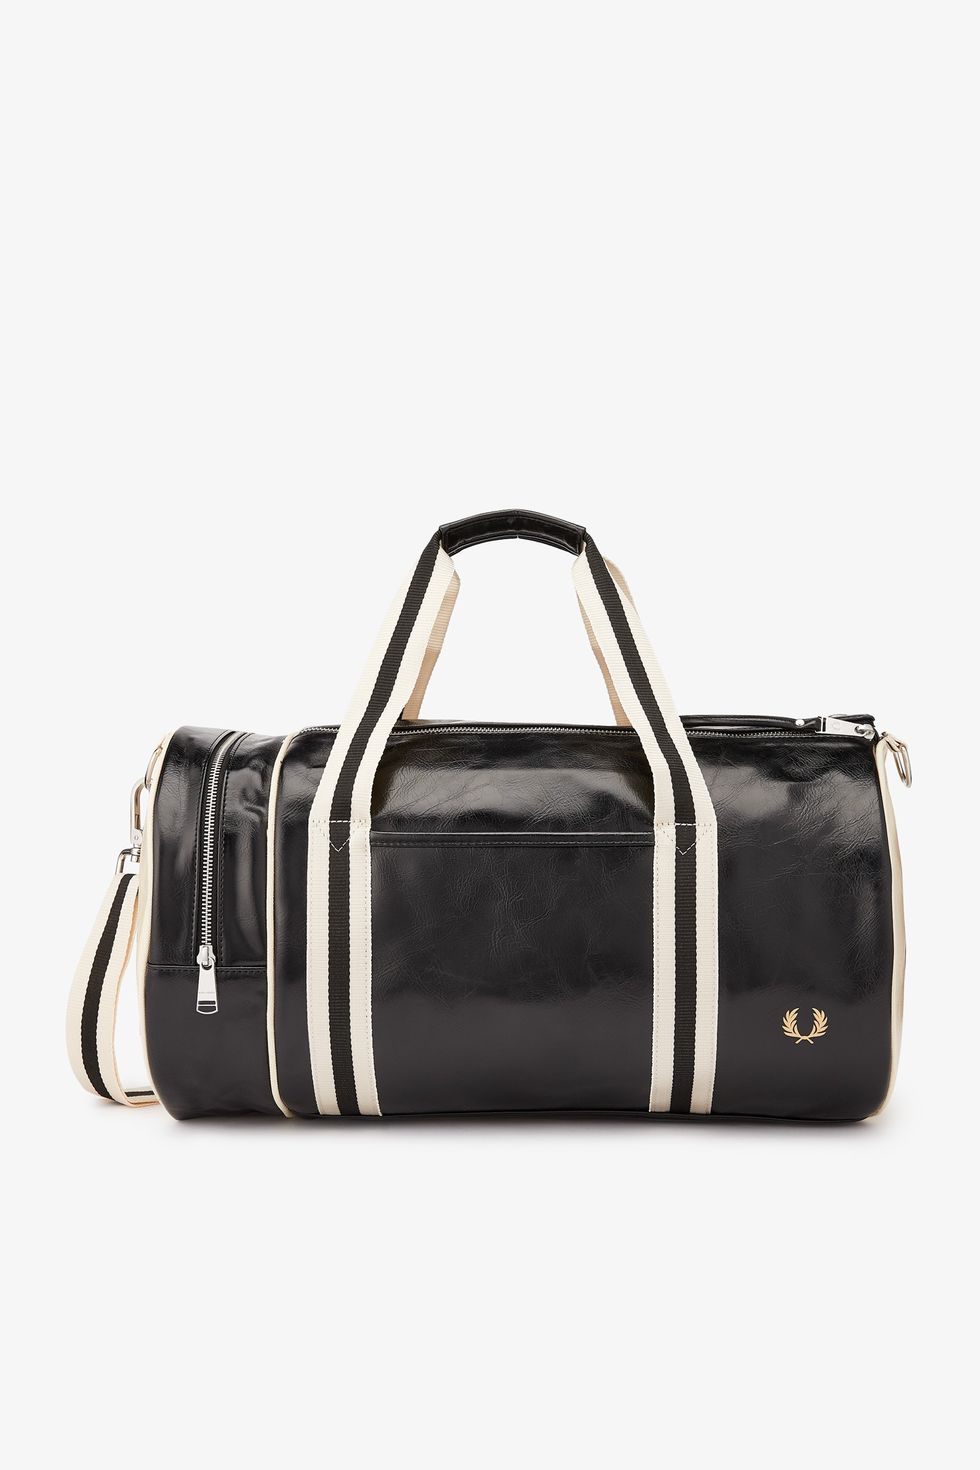 10 Best Gym Bags A Man Can Buy In 2021 | Esquire Picks